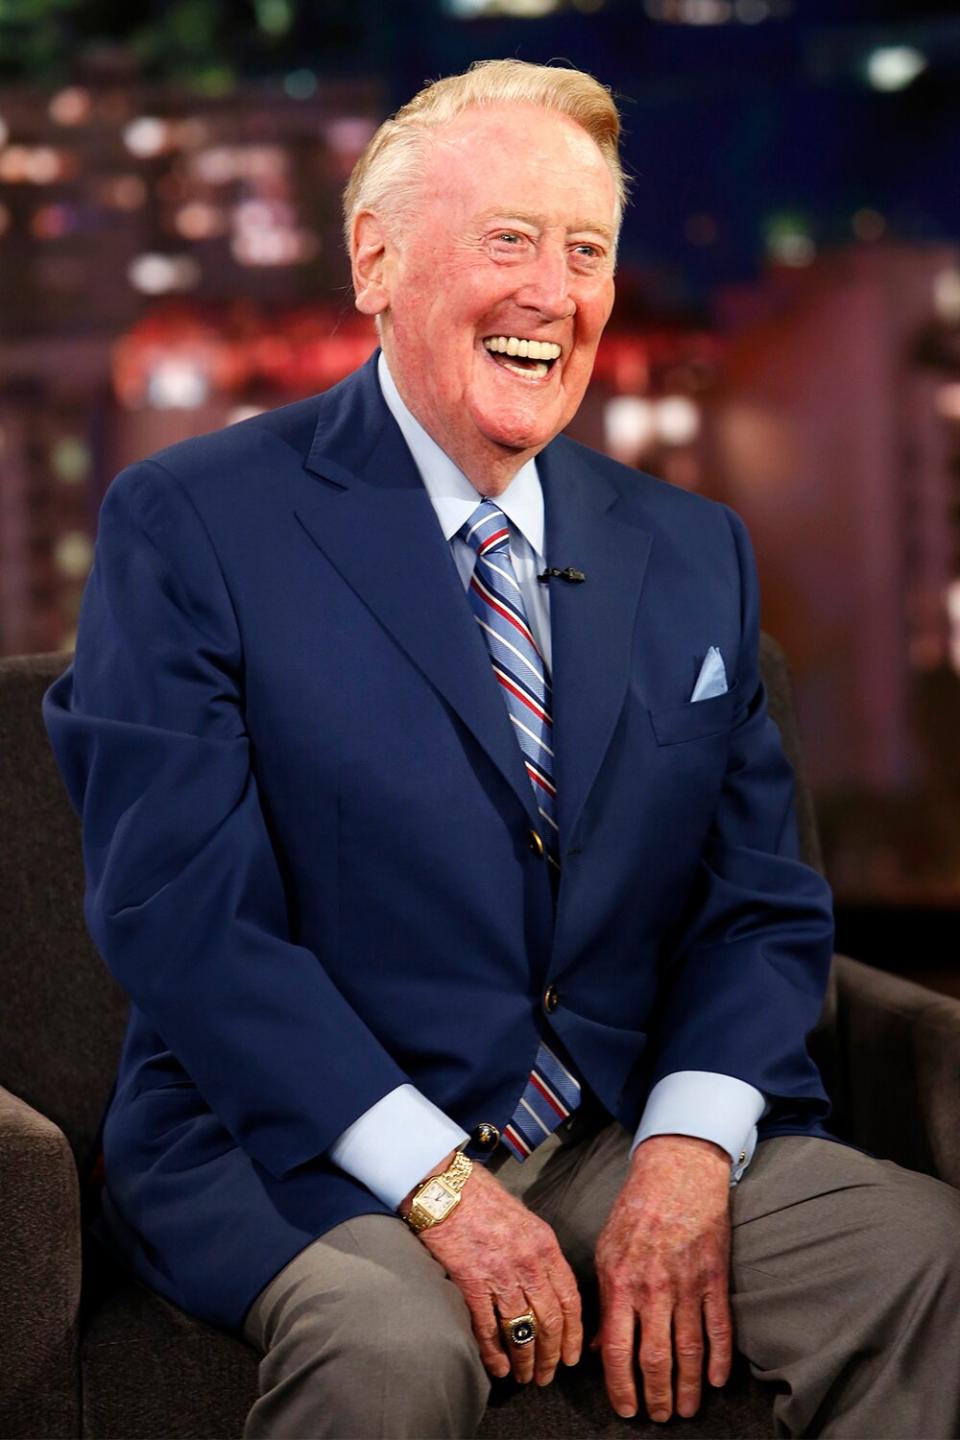 VIN SCULLY, Legendary voice of the Los Angeles Dodgers